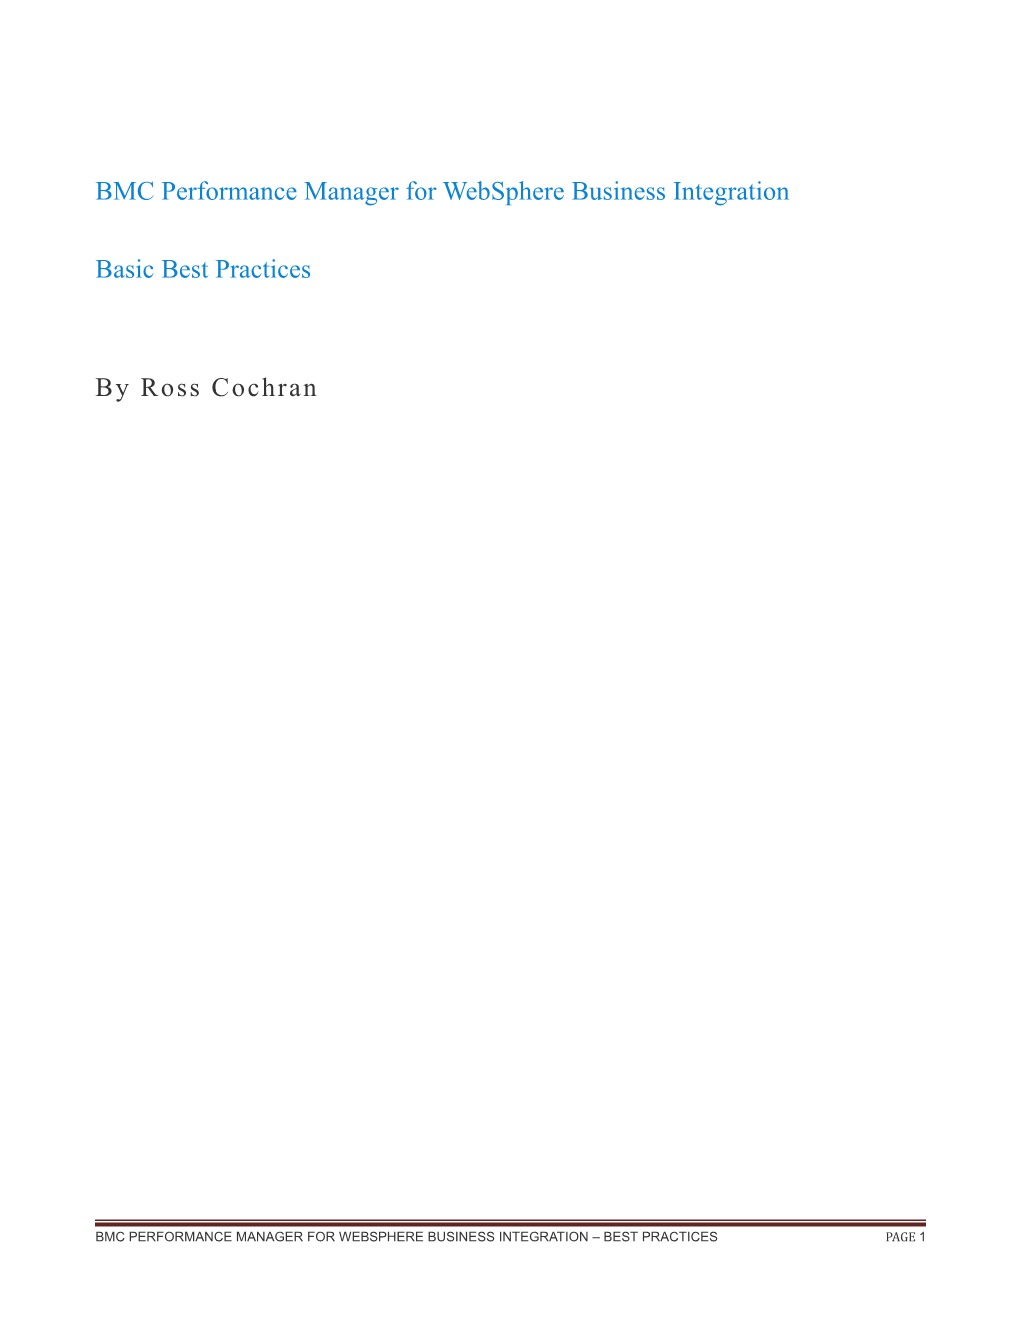 BMC Performance Manager for Websphere Businessintegration